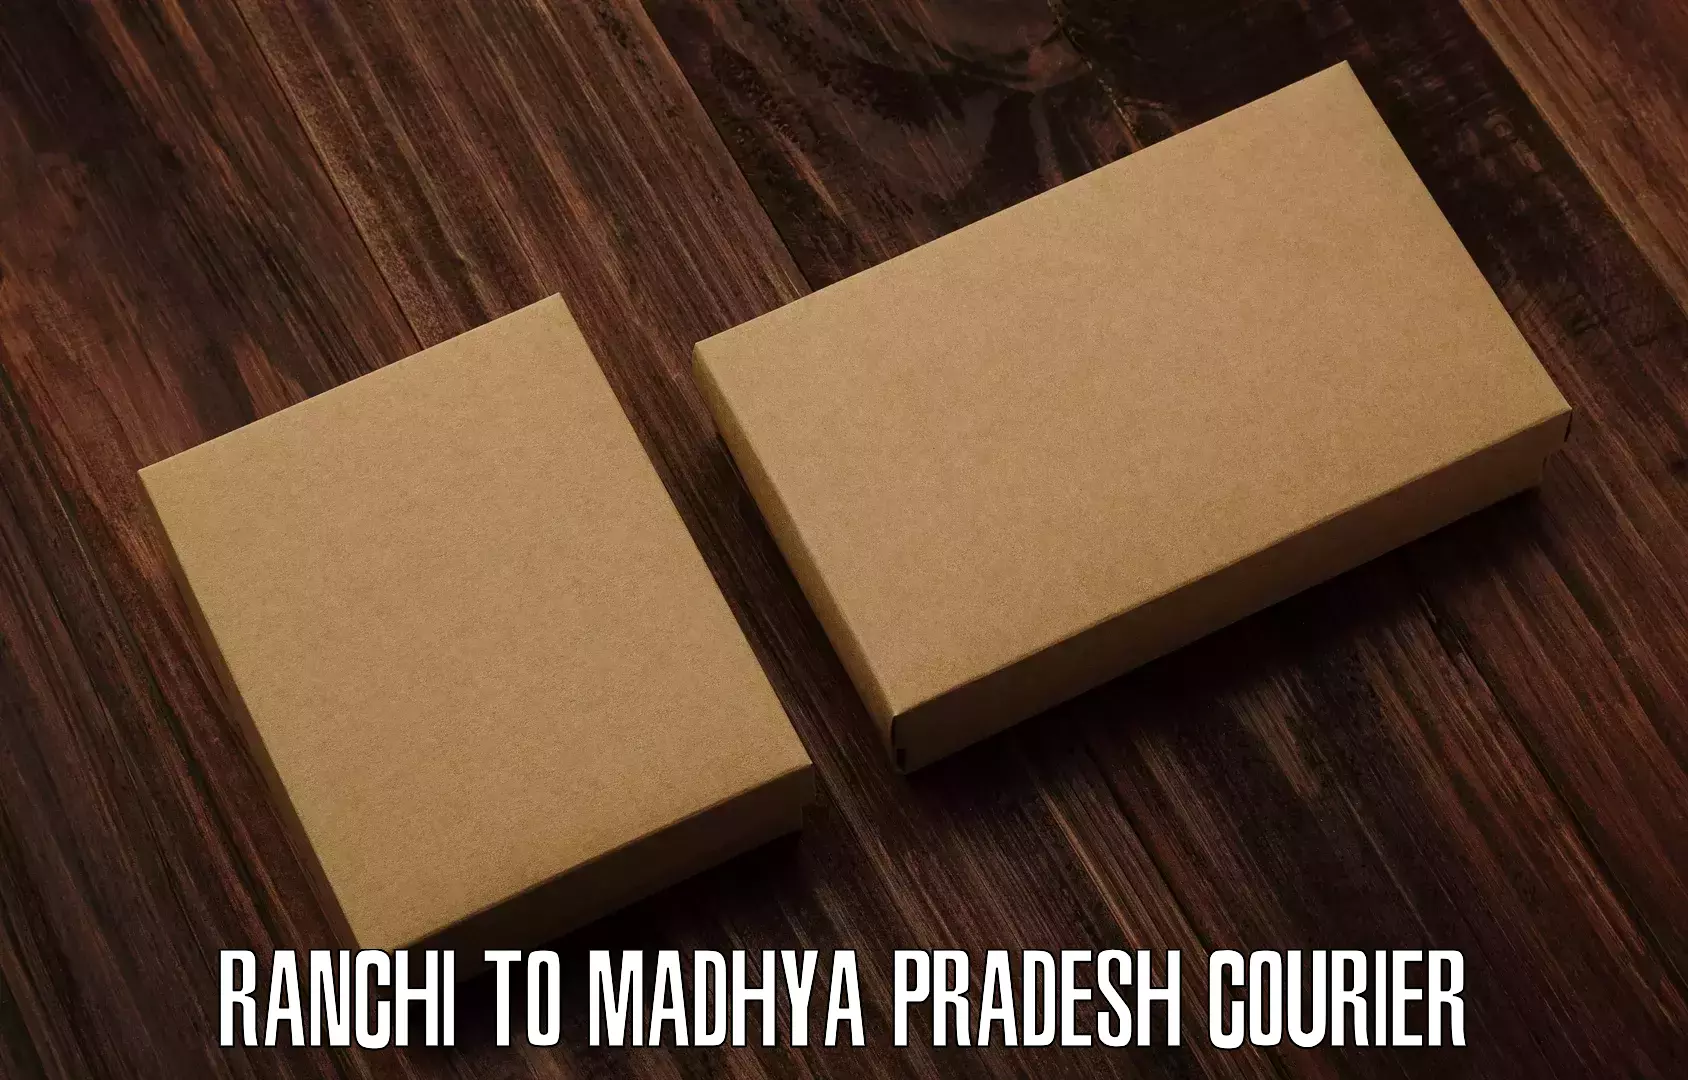 Next-generation courier services Ranchi to Kesali